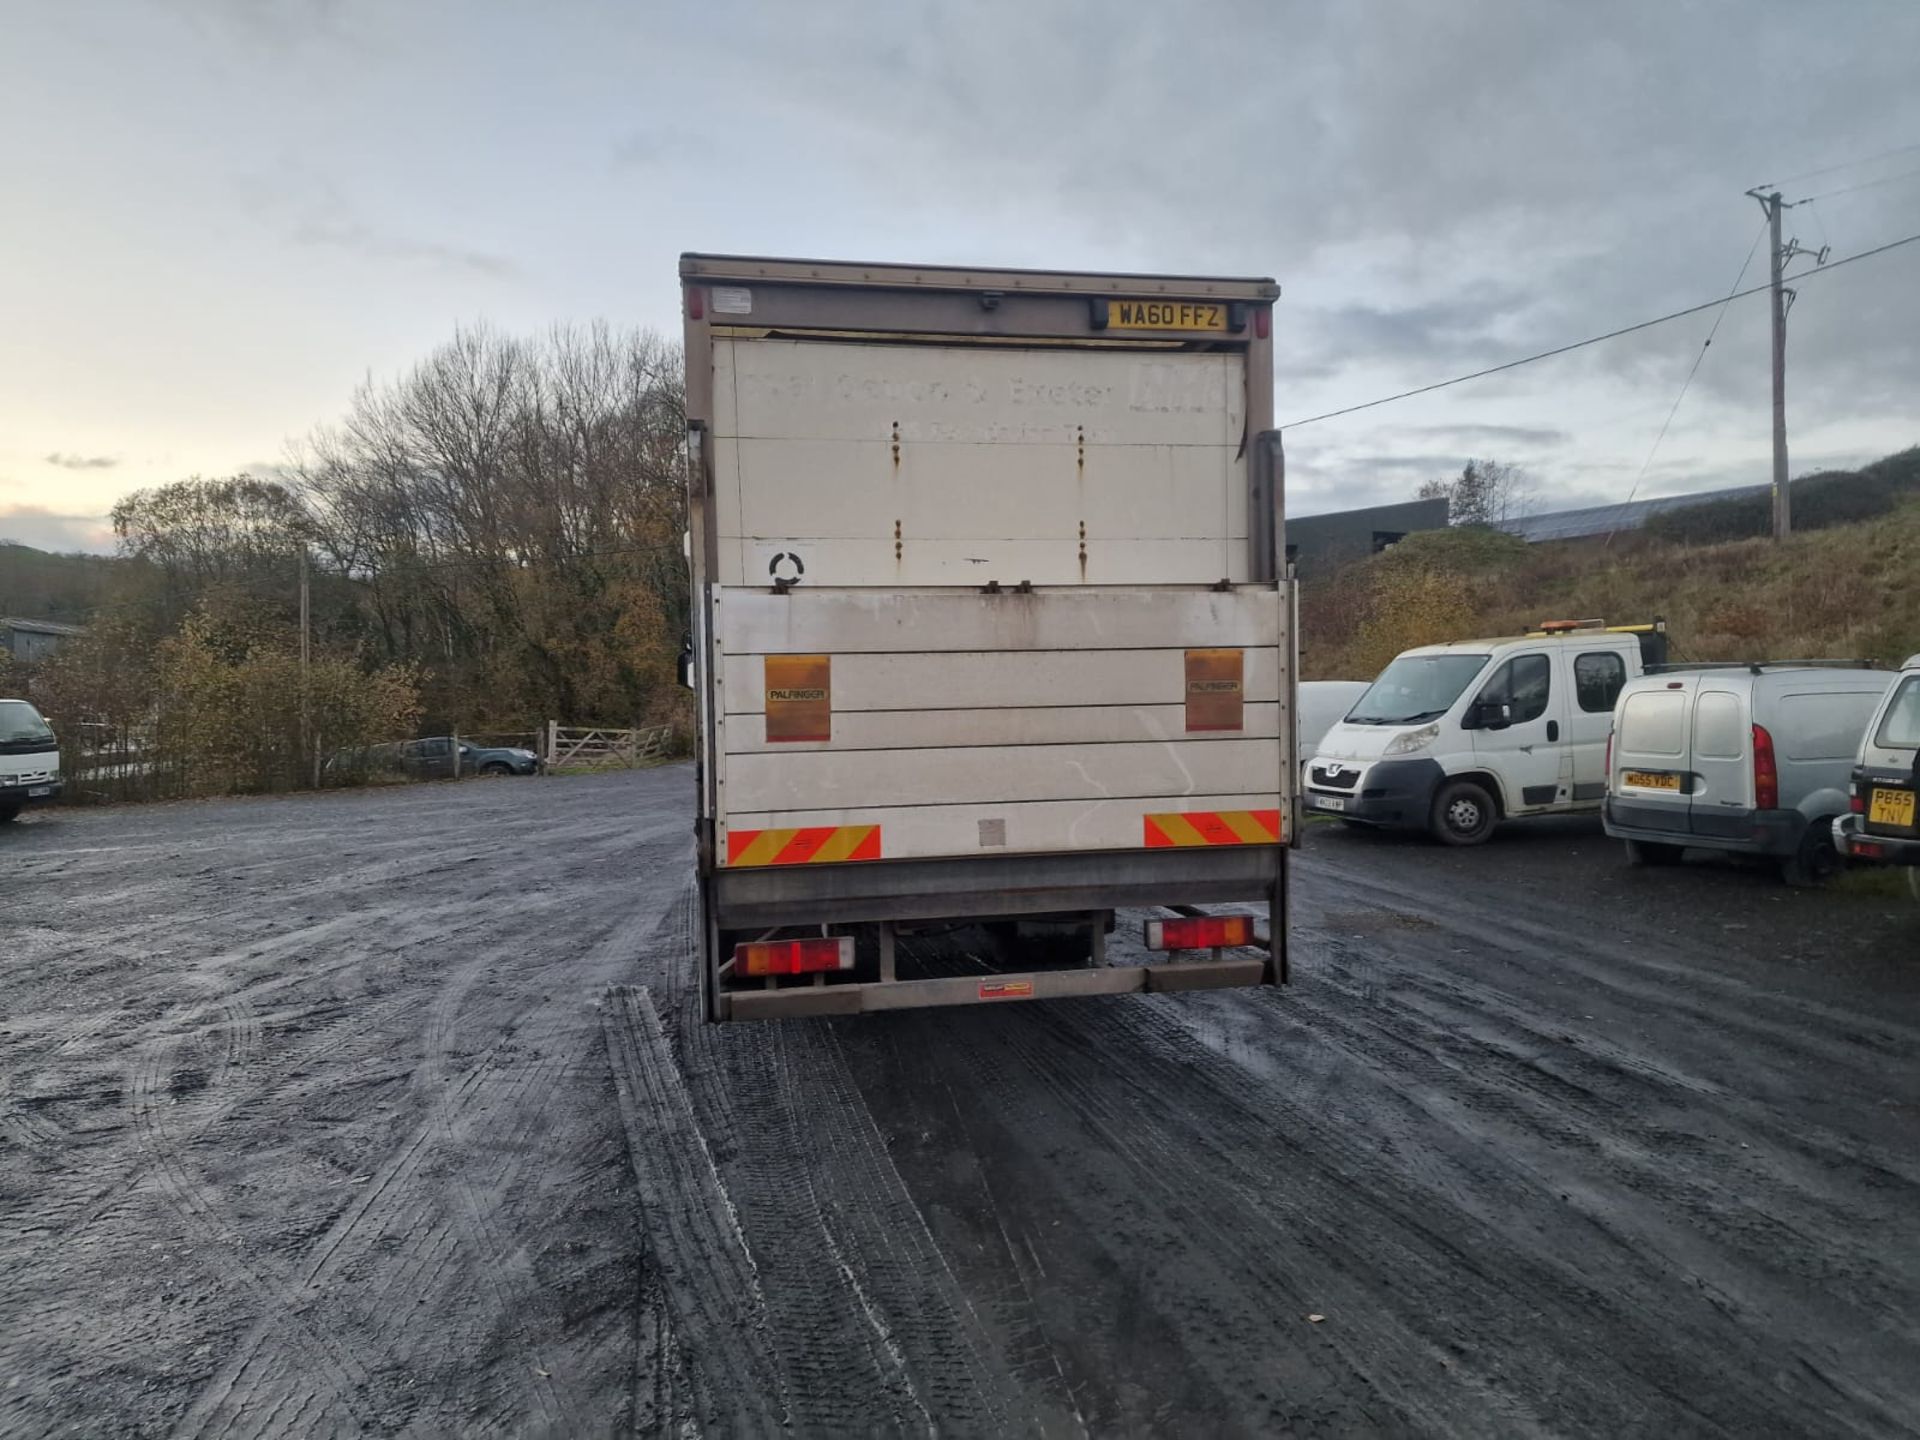 10/60 IVECO EUROCARGO (MY 2008) - 5880cc 2dr Lorry (White) - Image 16 of 16